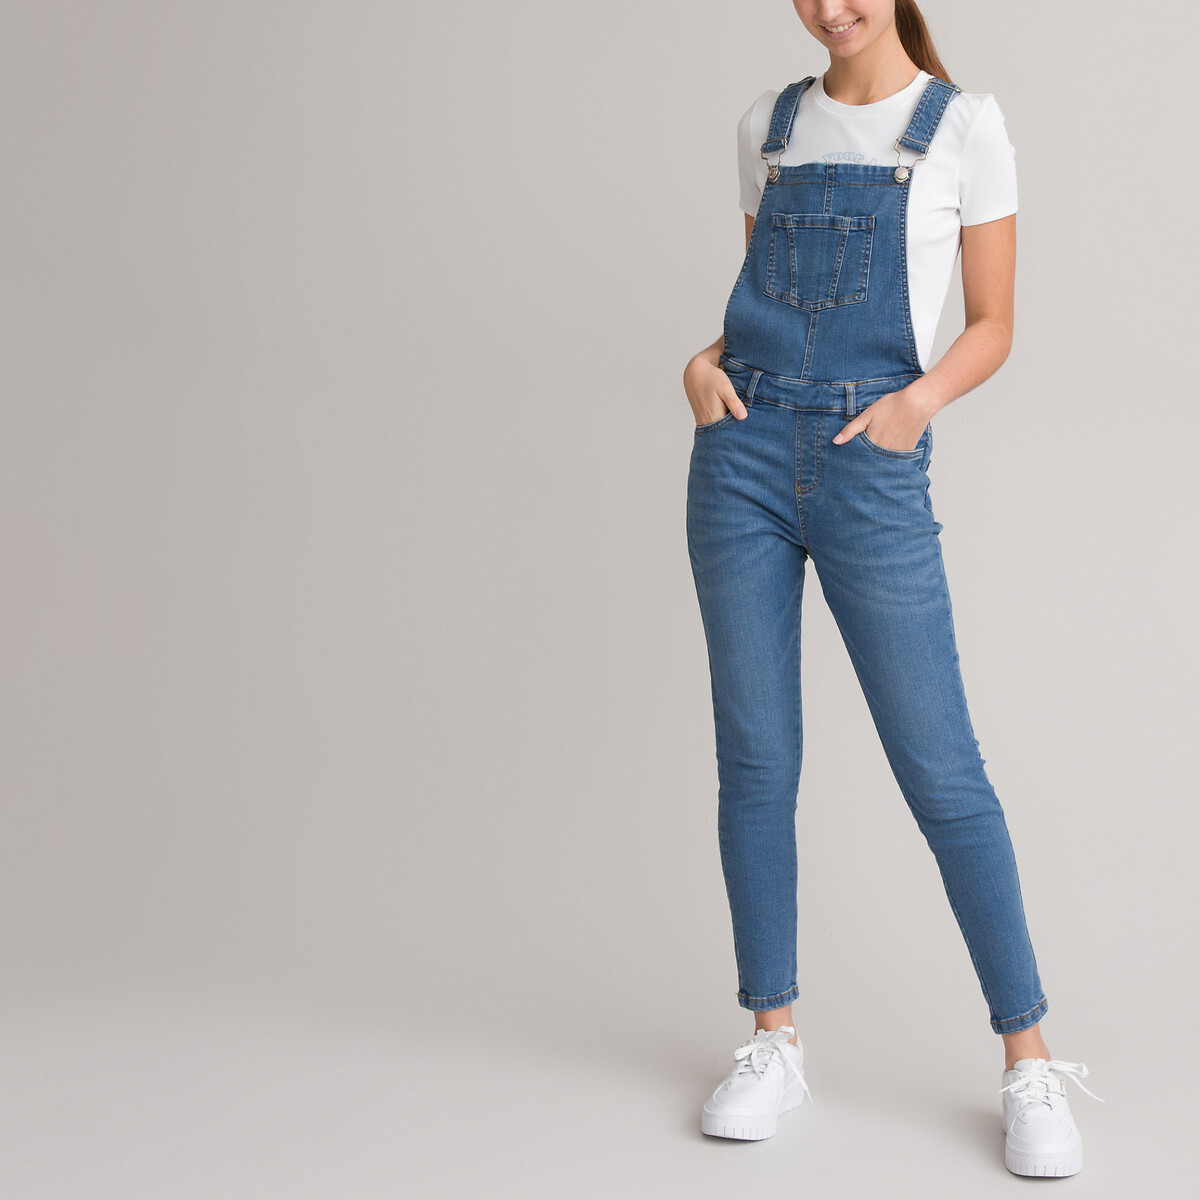 LA REDOUTE COLLECTIONS Salopette in jeans, skinny model